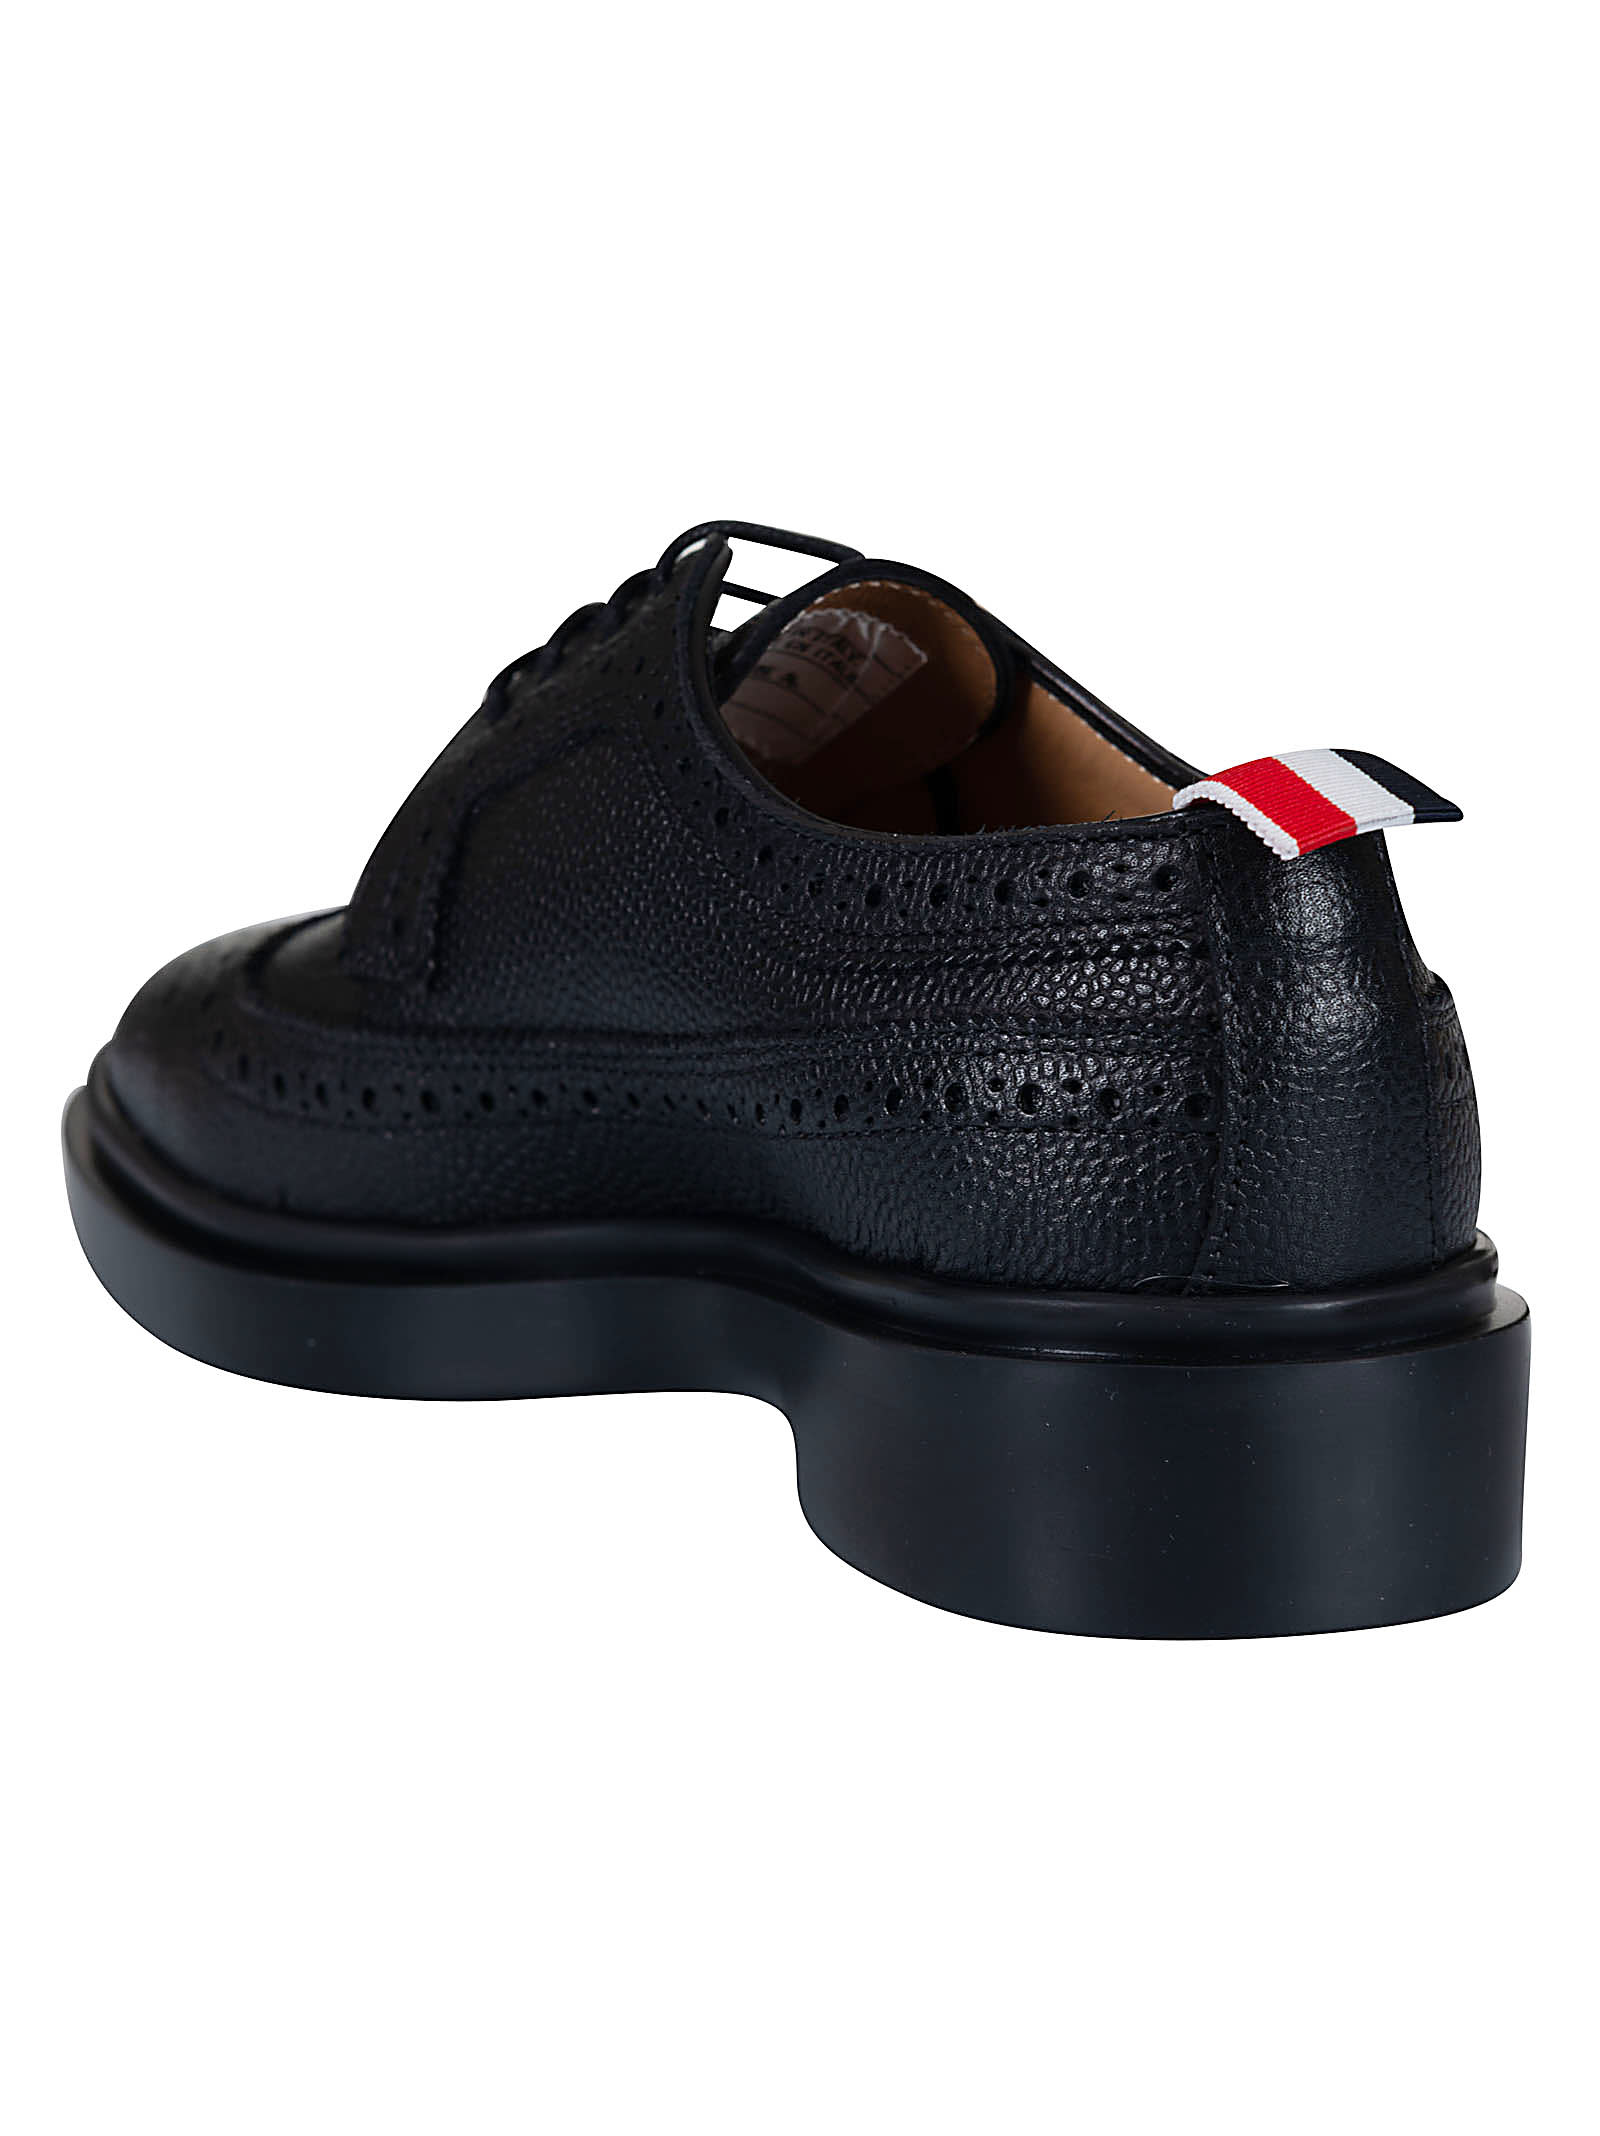 Thom Browne Laced Shoes | italist 